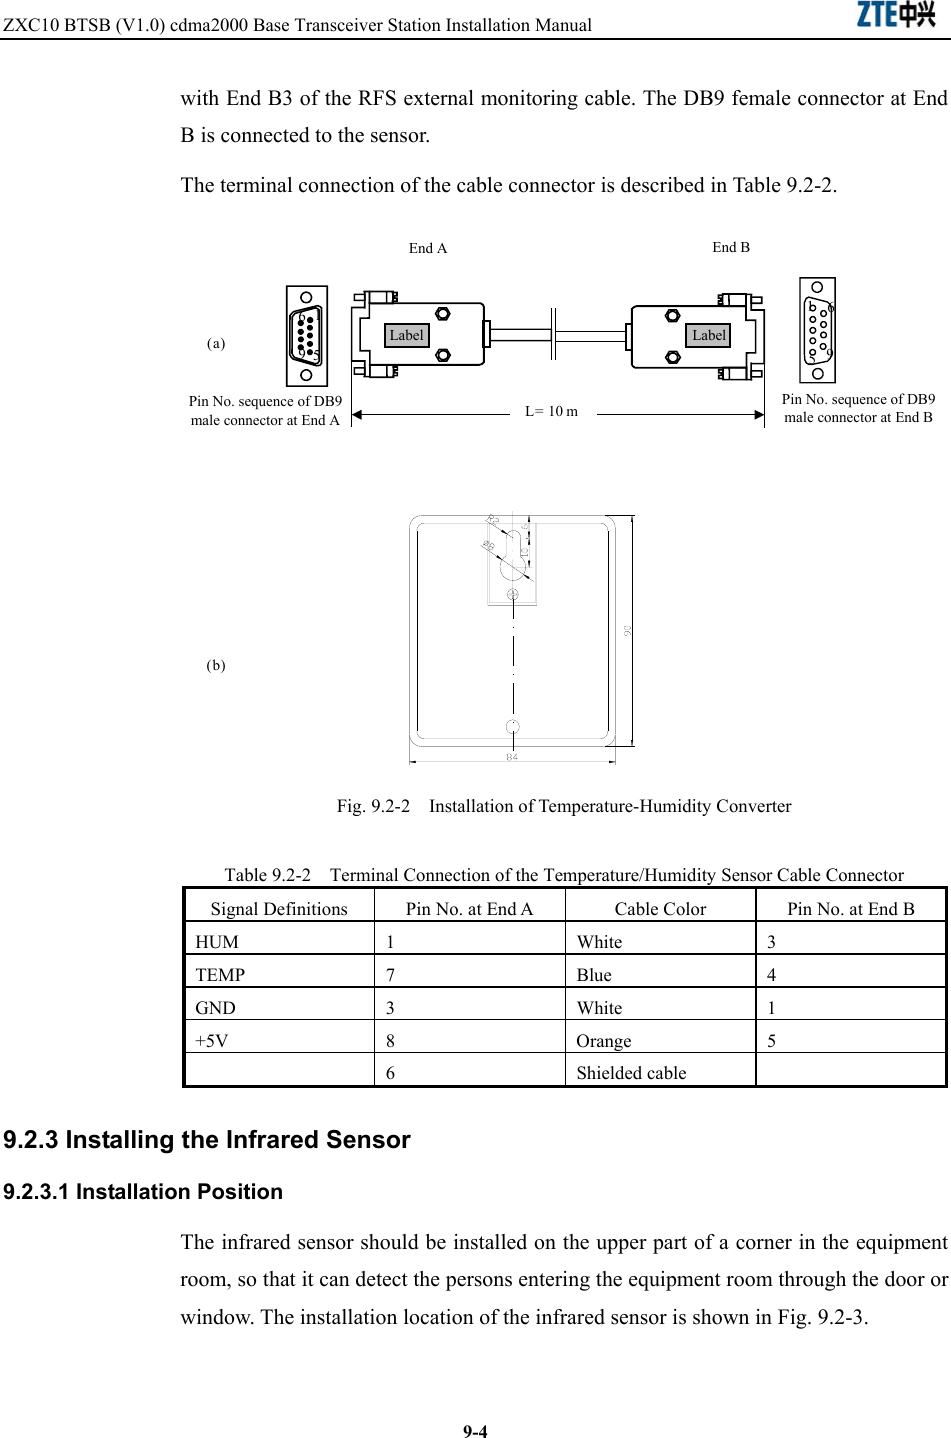 ZXC10 BTSB (V1.0) cdma2000 Base Transceiver Station Installation Manual                               9-4with End B3 of the RFS external monitoring cable. The DB9 female connector at End B is connected to the sensor. The terminal connection of the cable connector is described in Table 9.2-2.  Pin No. sequence of DB9 male connector at End A1  6  9 5End ALabelEnd B  Pin No. sequence of DB9 male connector at End B15  6  9LabelL= 10 m(a)(b) Fig. 9.2-2    Installation of Temperature-Humidity Converter Table 9.2-2    Terminal Connection of the Temperature/Humidity Sensor Cable ConnectorSignal Definitions  Pin No. at End A  Cable Color  Pin No. at End B HUM 1  White 3 TEMP 7  Blue  4 GND 3  White 1 +5V 8  Orange 5  6 Shielded cable  9.2.3 Installing the Infrared Sensor 9.2.3.1 Installation Position The infrared sensor should be installed on the upper part of a corner in the equipment room, so that it can detect the persons entering the equipment room through the door or window. The installation location of the infrared sensor is shown in Fig. 9.2-3.   